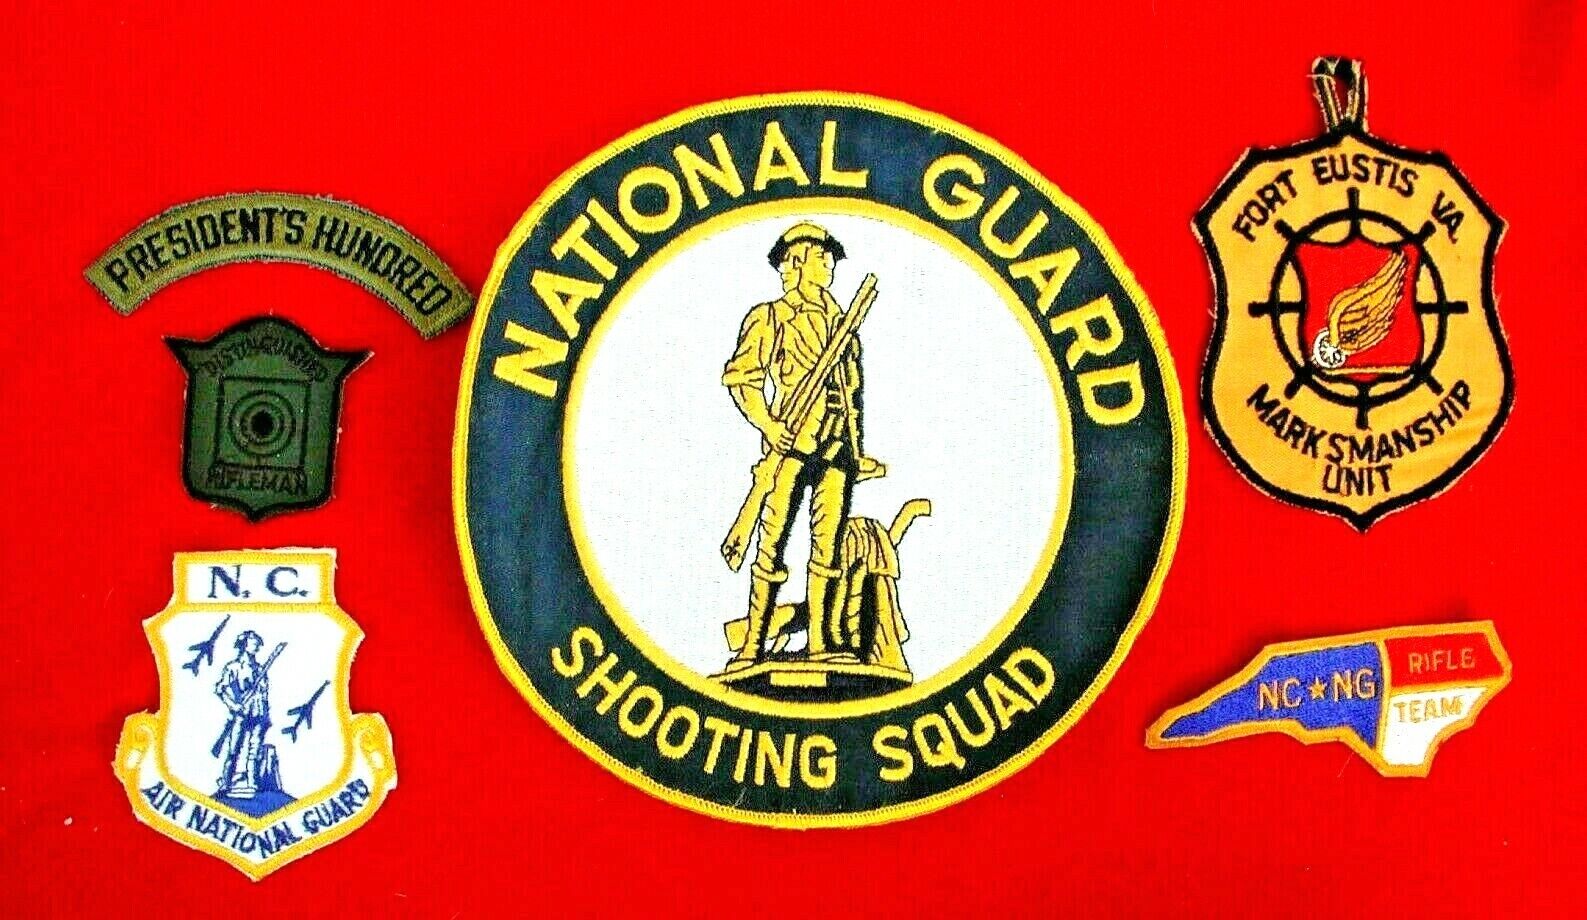 Very Rare N.C. Air National Guard Shooting Team Patches Distinguished Rifleman